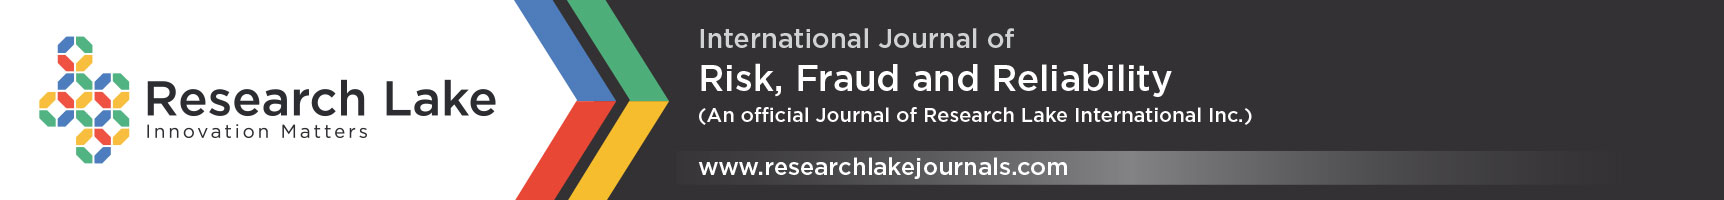 International Journal of Risk, Fraud and Reliability